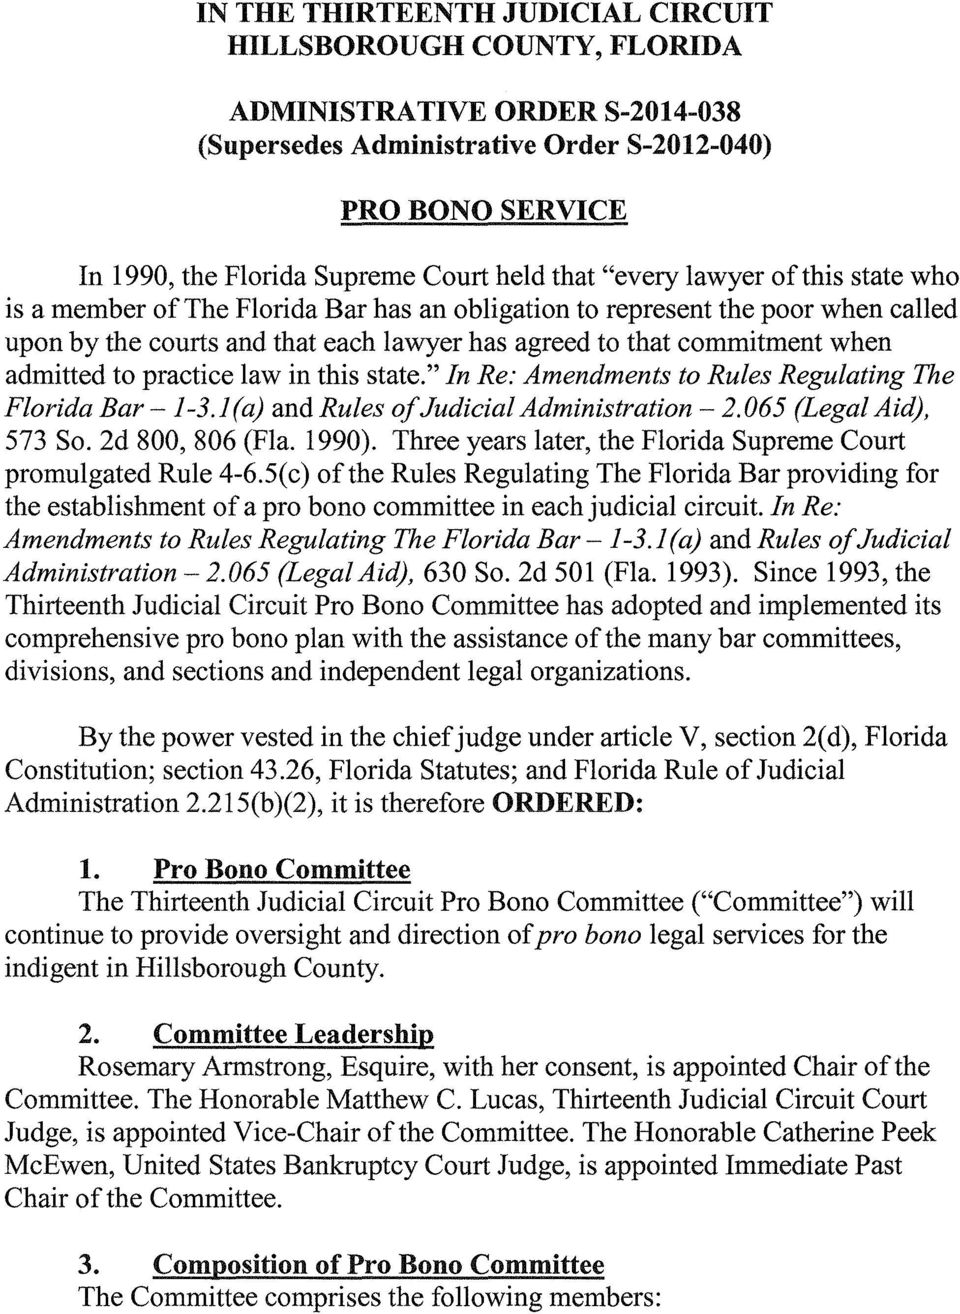 admitted to practice law in this state." In Re: Amendments to Rules Regulating The Florida Bar -l-3.l(a) and Rules of Judicial Administration- 2.065 (Legal Aid), 573 So. 2d 800, 806 (Fla. 1990).